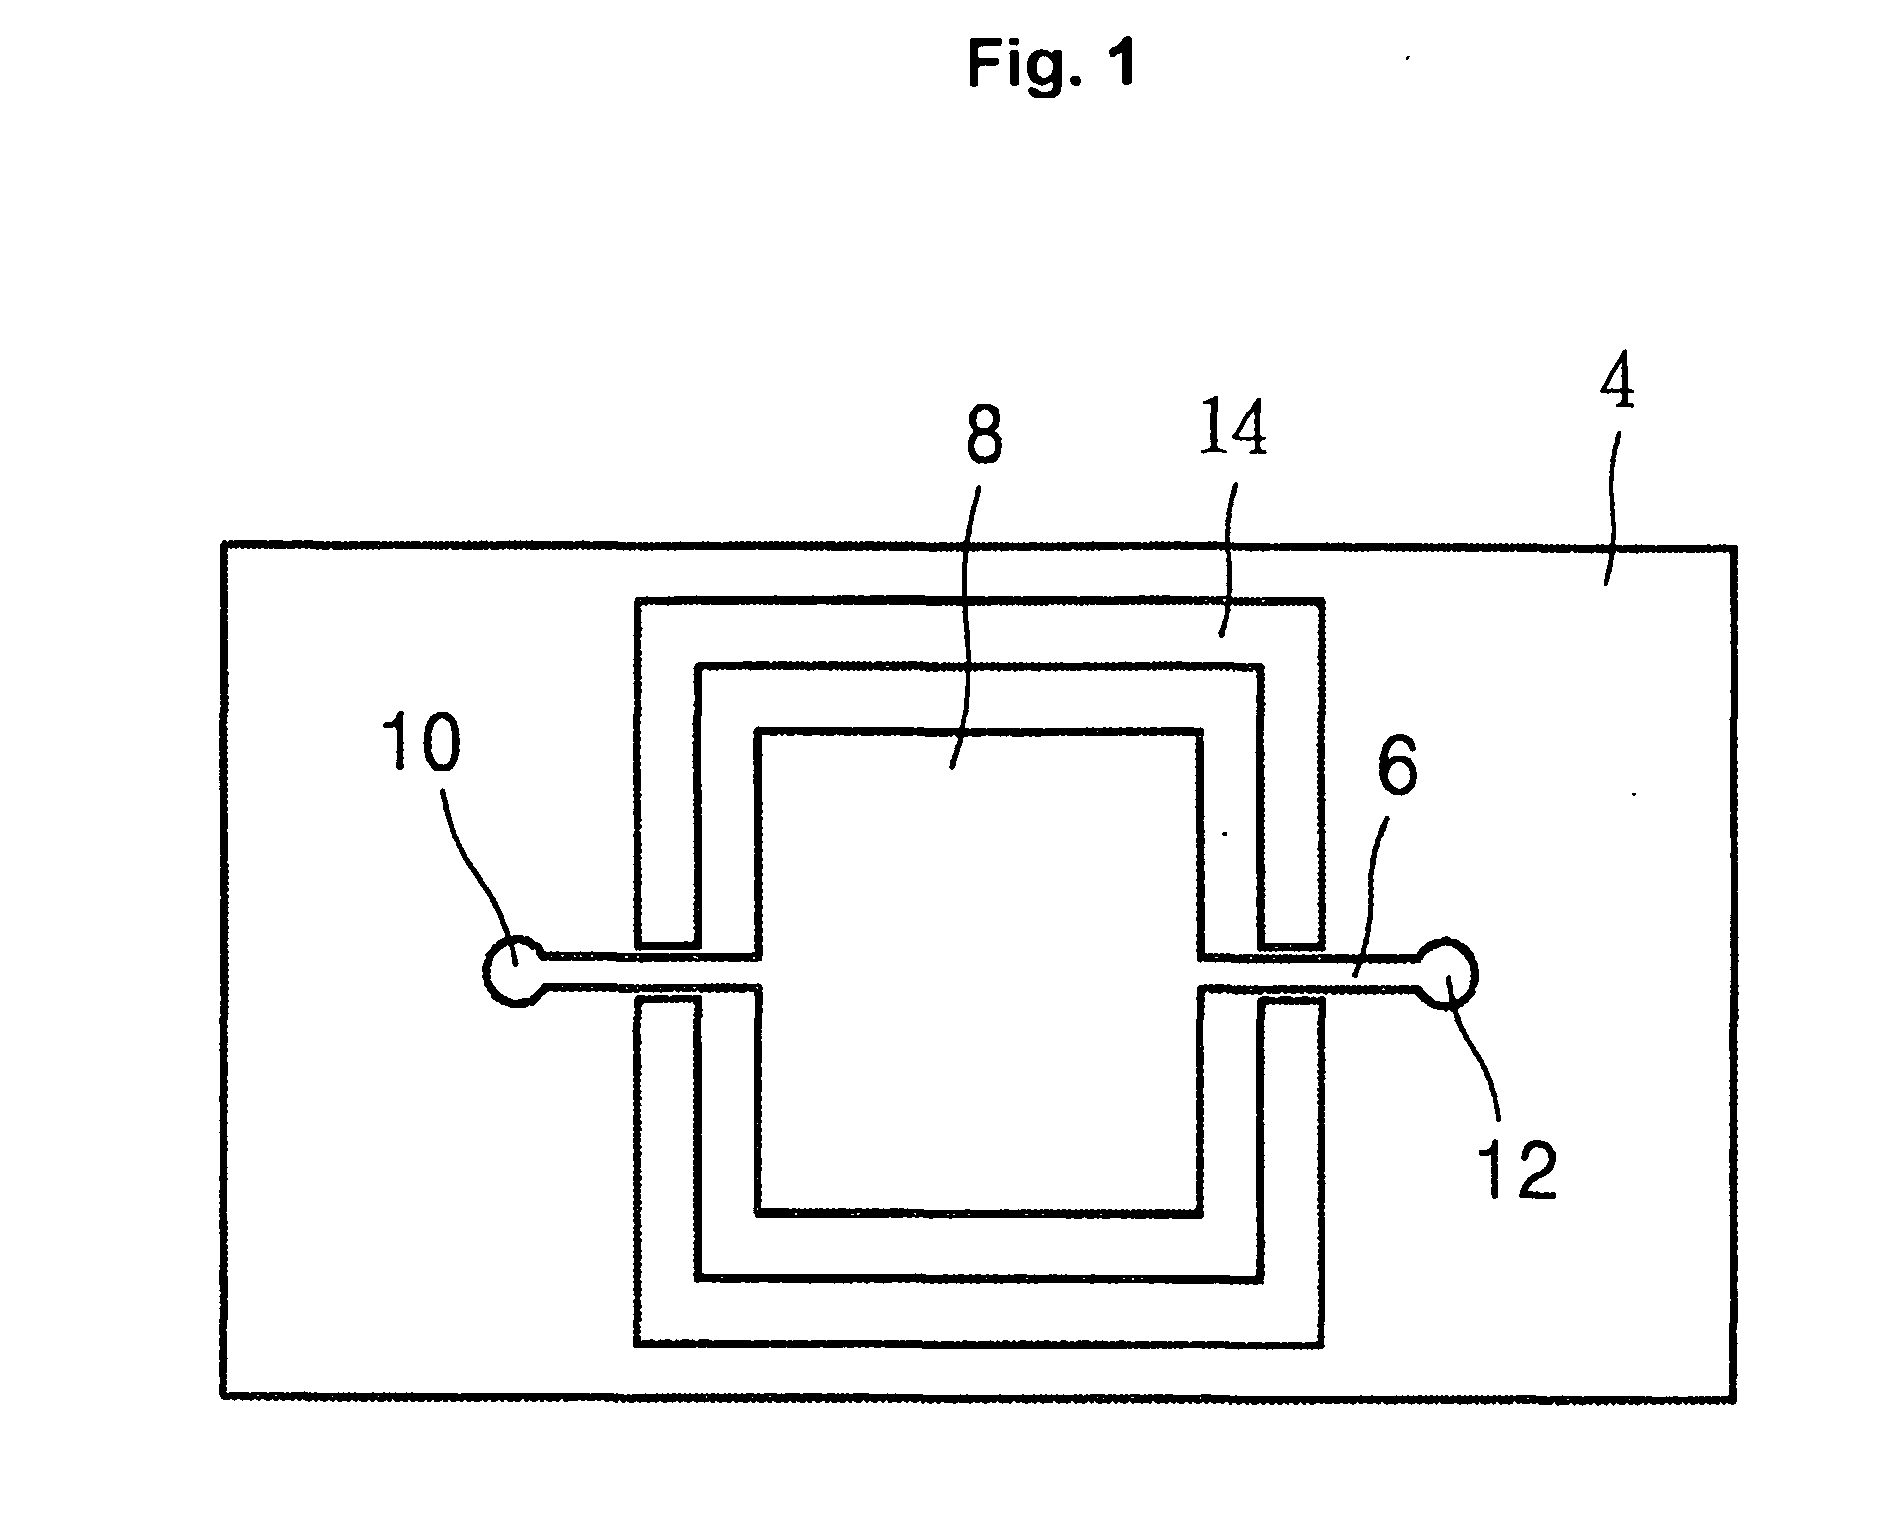 Apparatus and method for amplifying a polynucleotide